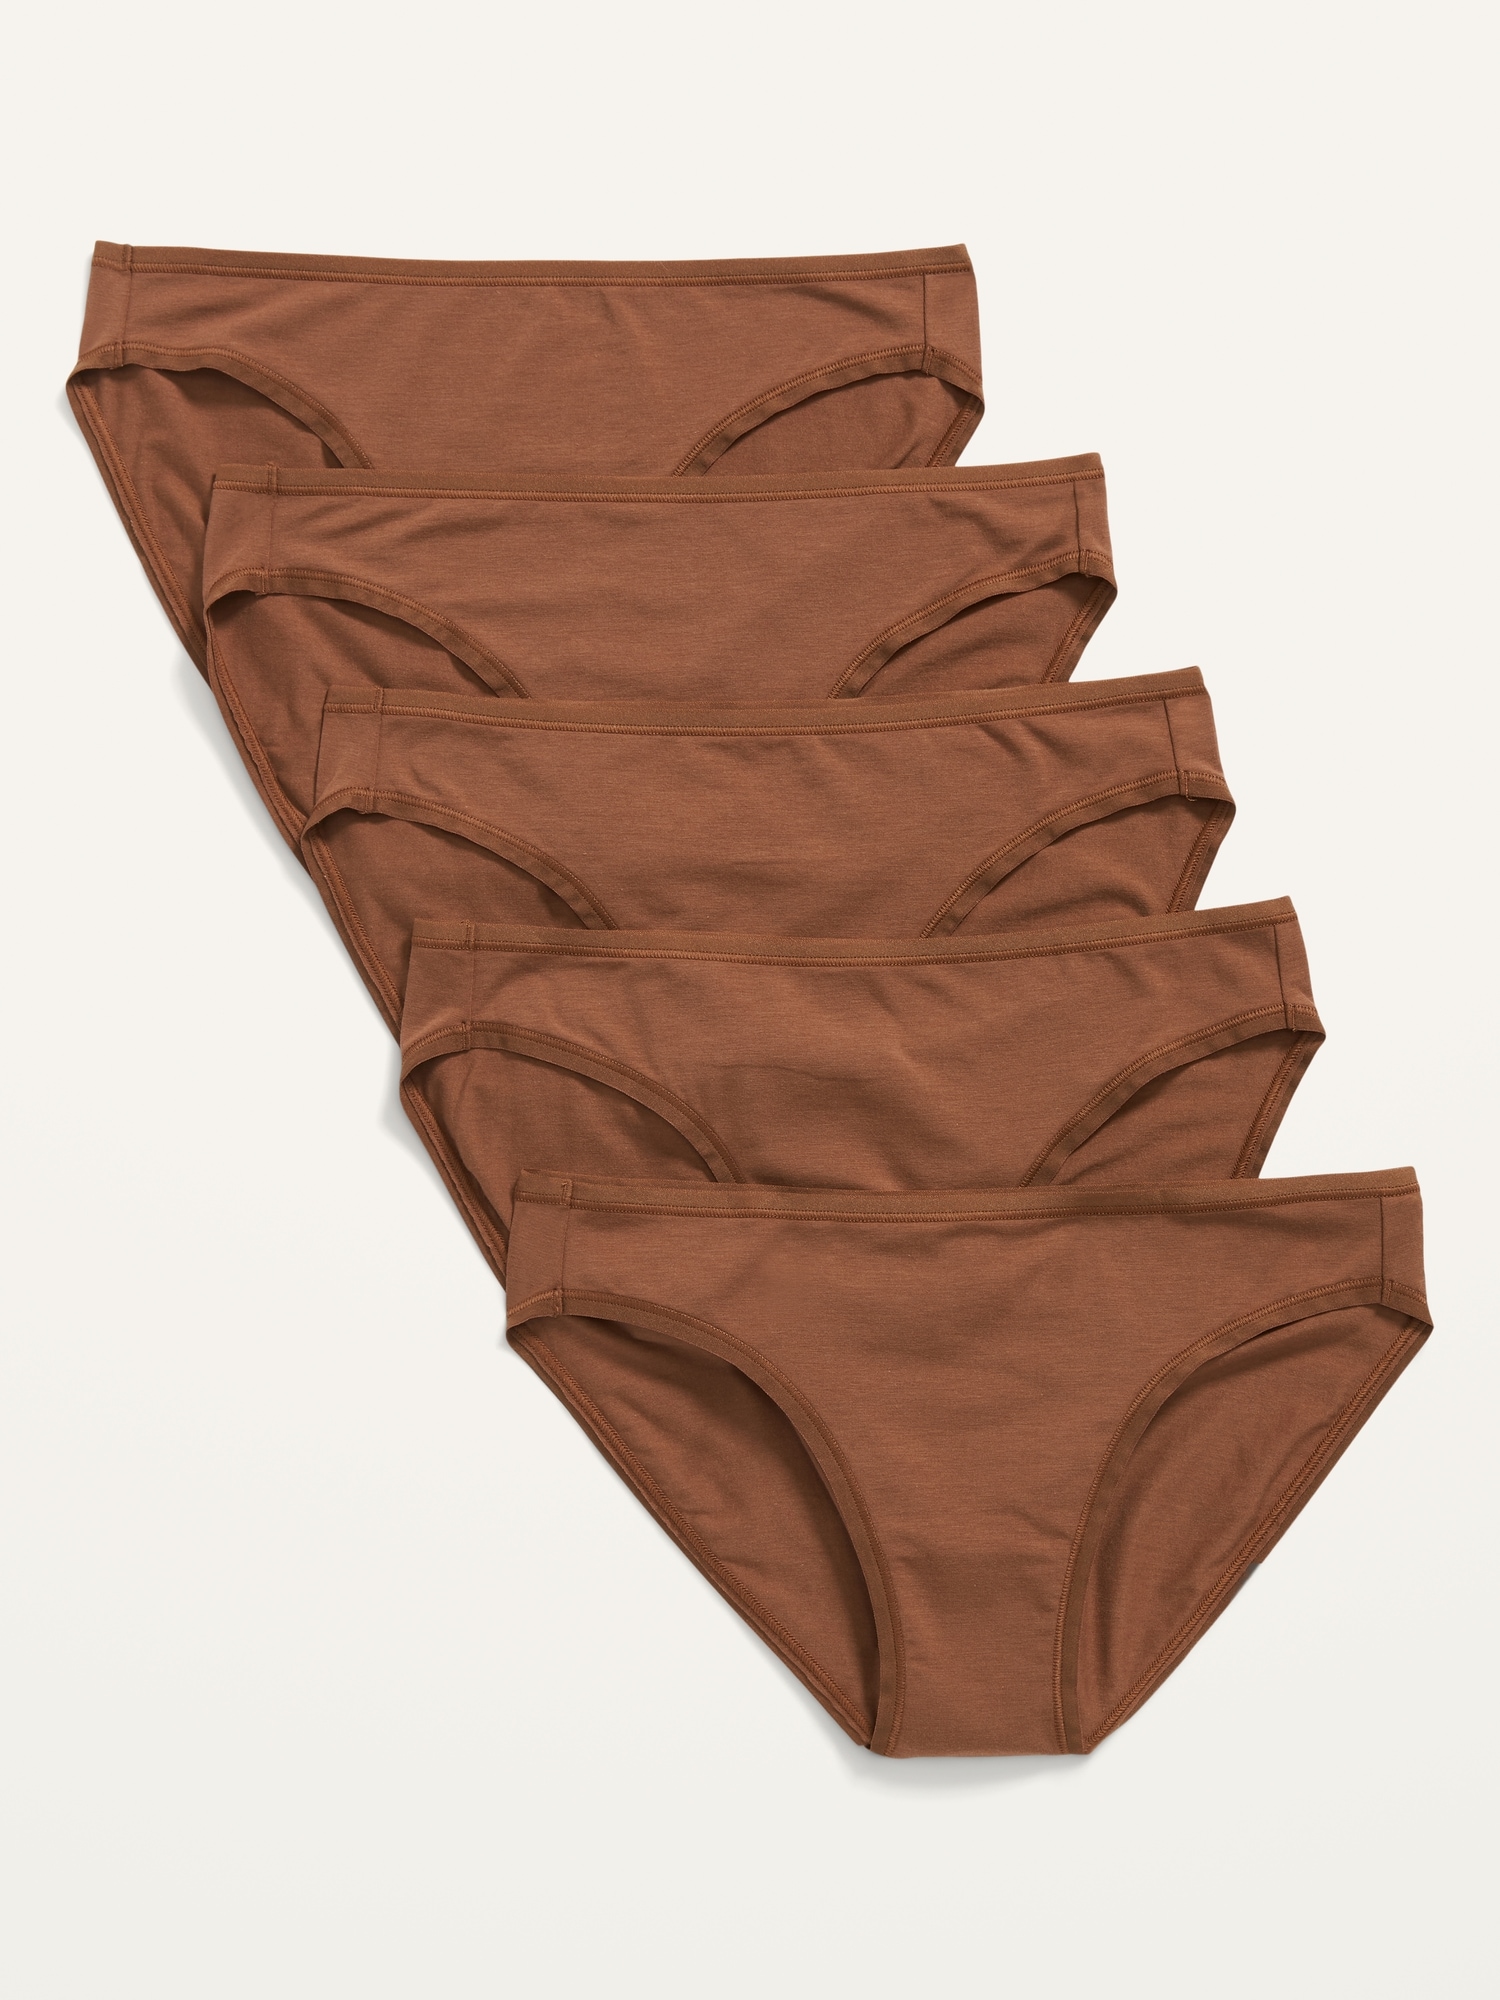 NEW NWT Womens 3X 22 / 24 Camel Brown Cotton Blend Panty Underwear